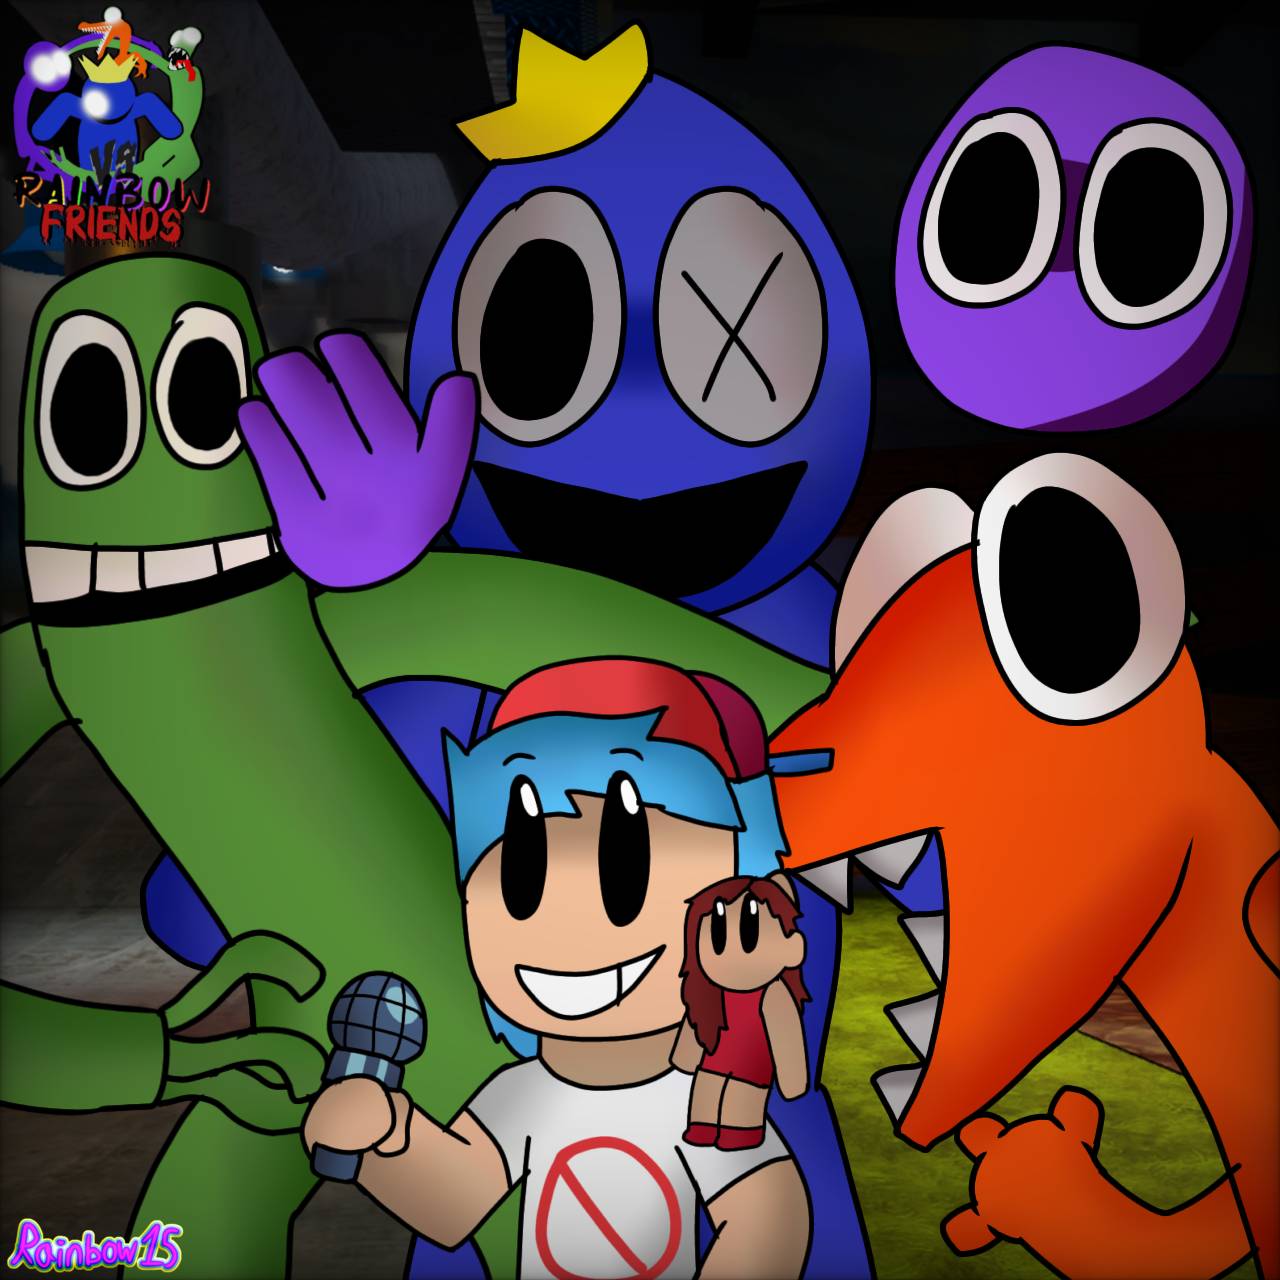 FNF Rainbow Friends Remastered by Orcablox on DeviantArt